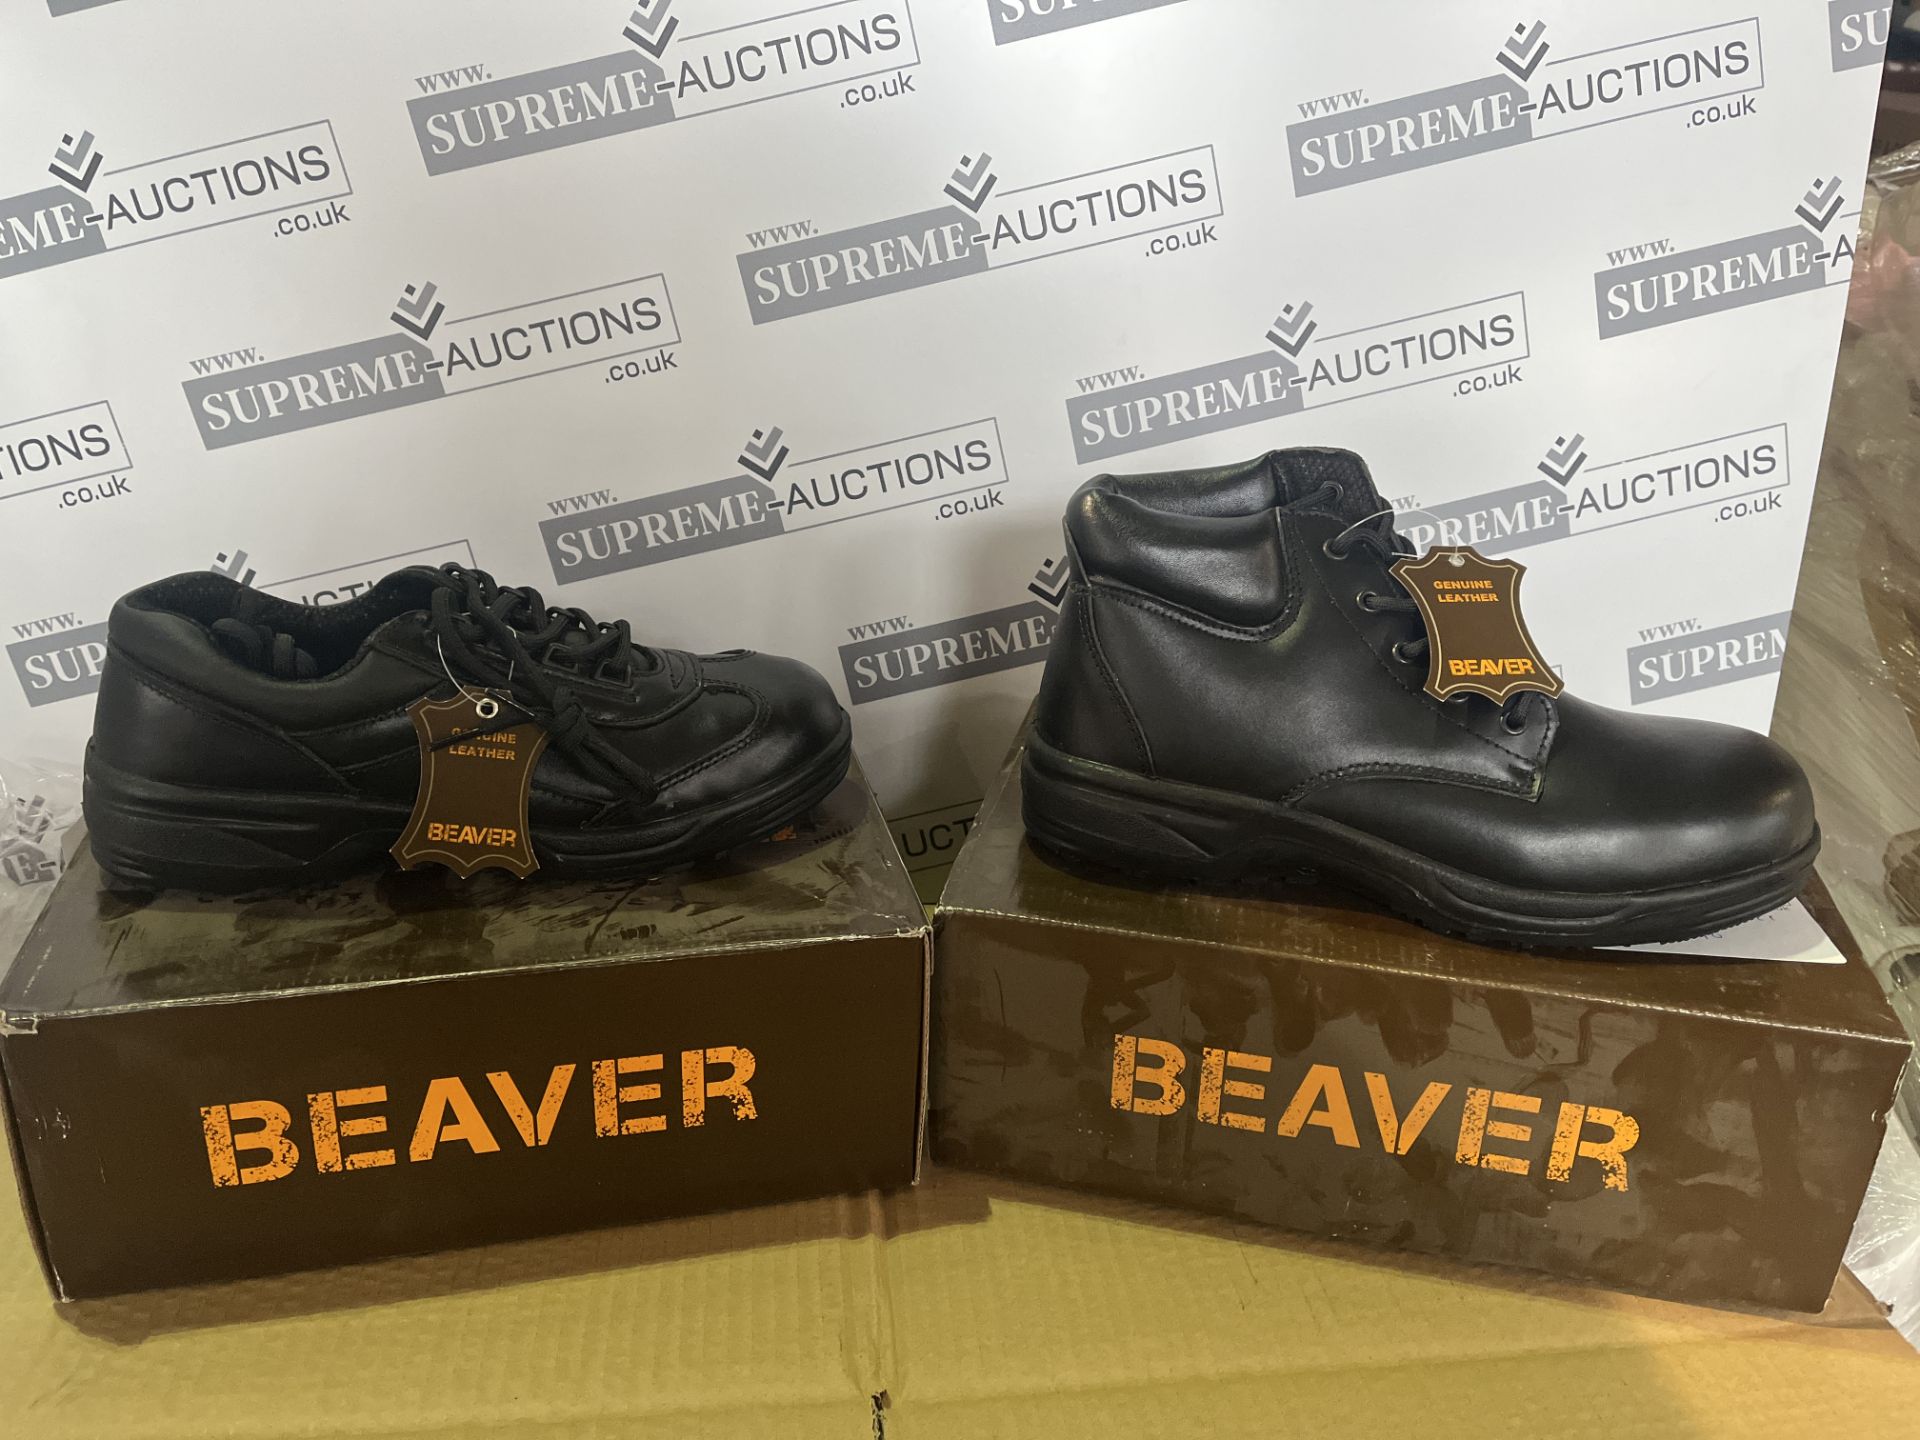 5 X BRAND NEW BEAVER PROFESSIONAL WORK BOOTS IN VARIOUS STYLES AND SIZES R15-8